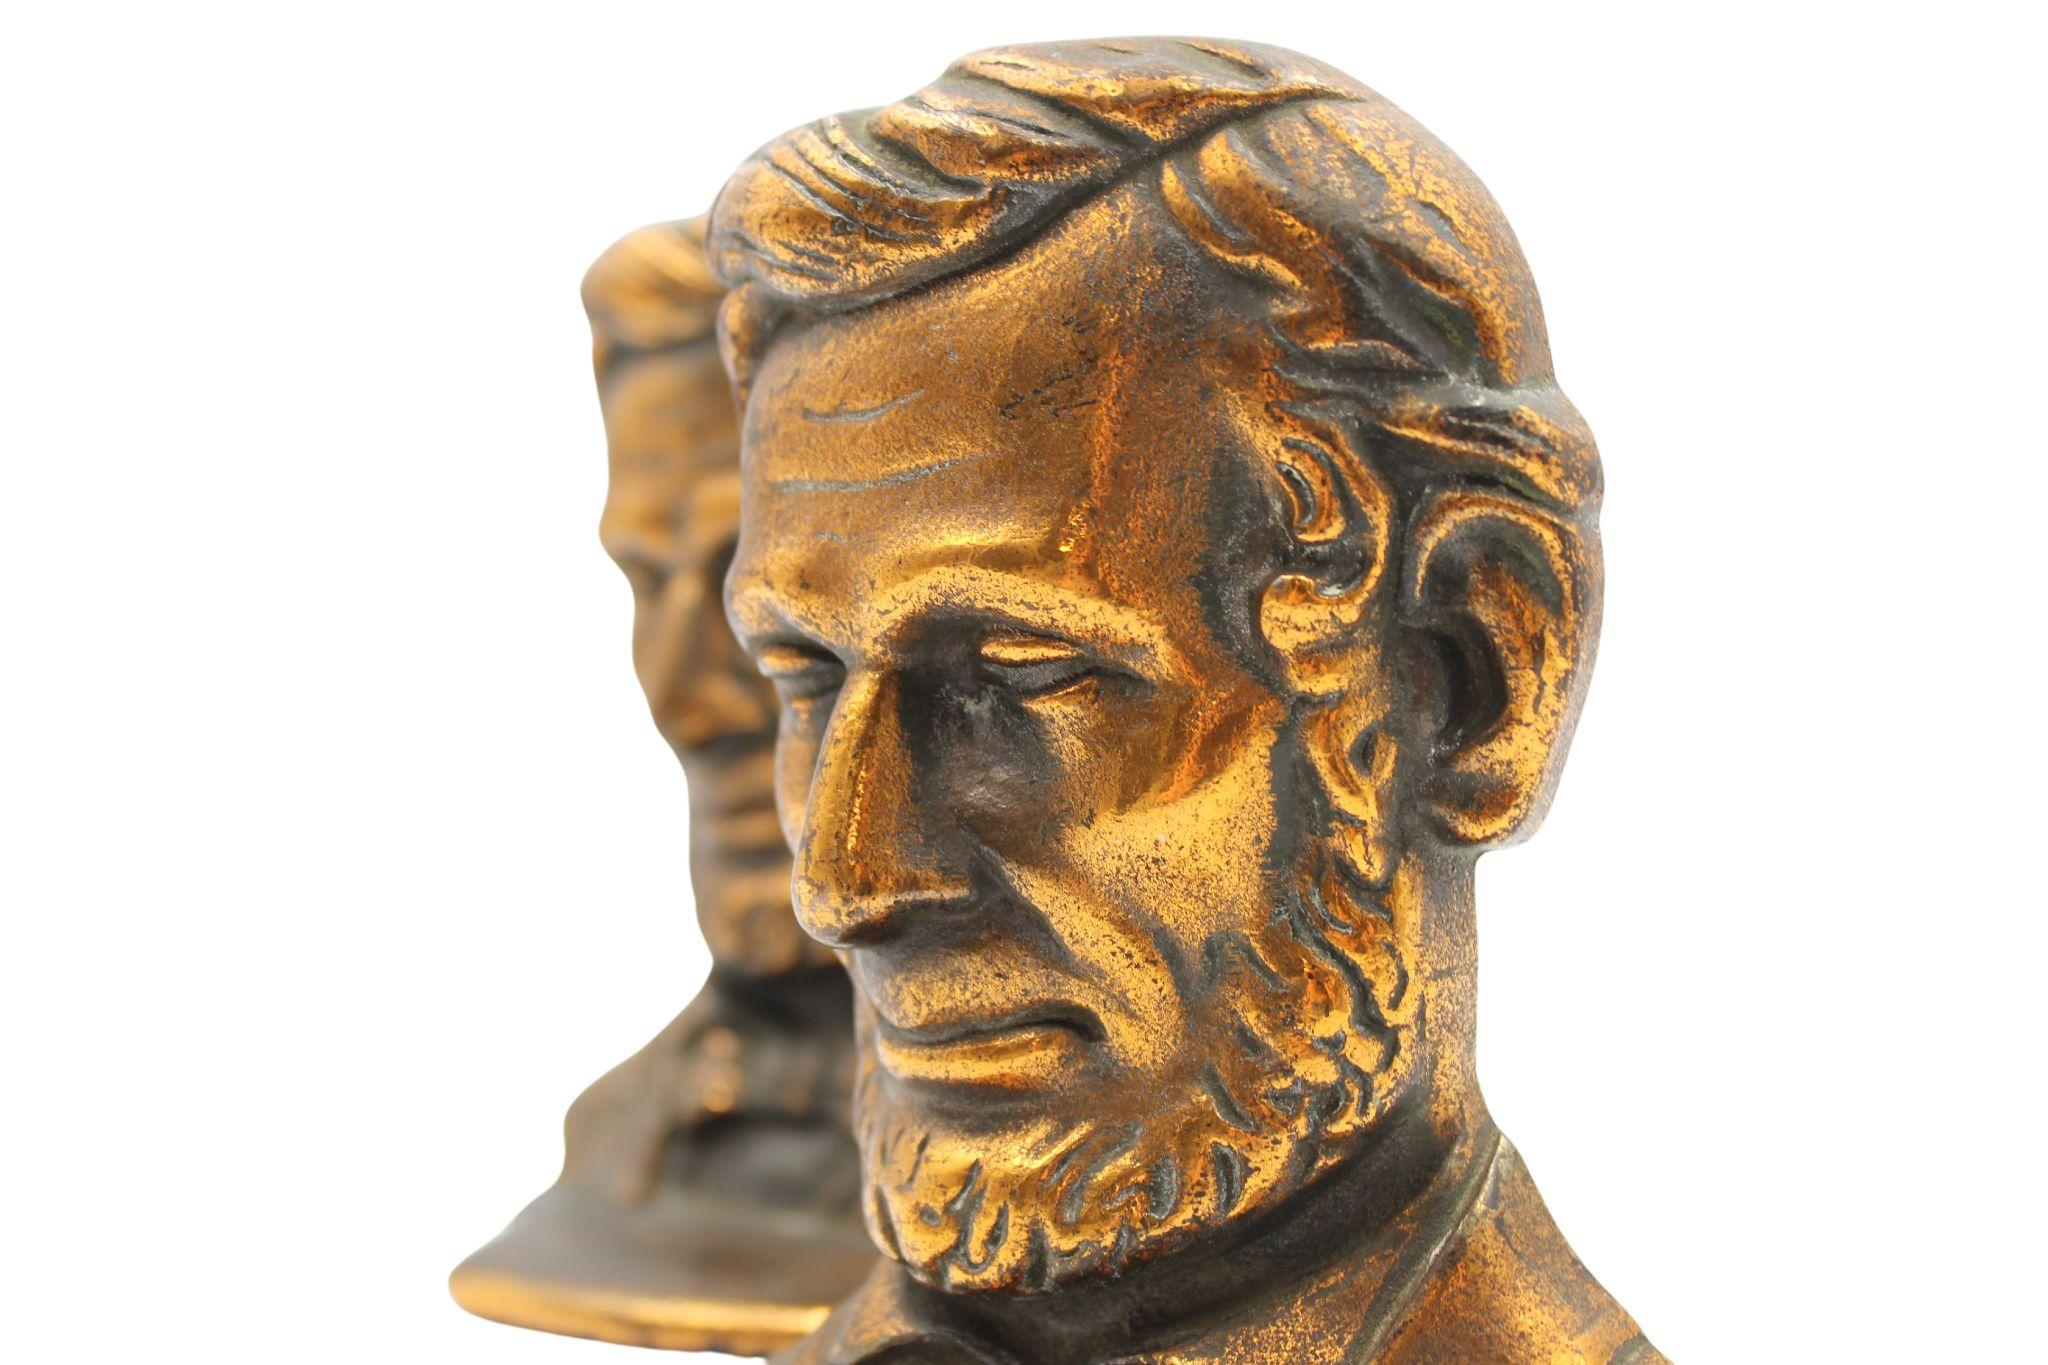 Offered is a pair of vintage Abraham Lincoln bust bookends. The pair feature the likeness of Abraham Lincoln with detailed facial features and formal attire. 

The Lincoln bust is modeled after the 1887 full-length standing bronze by Augustus